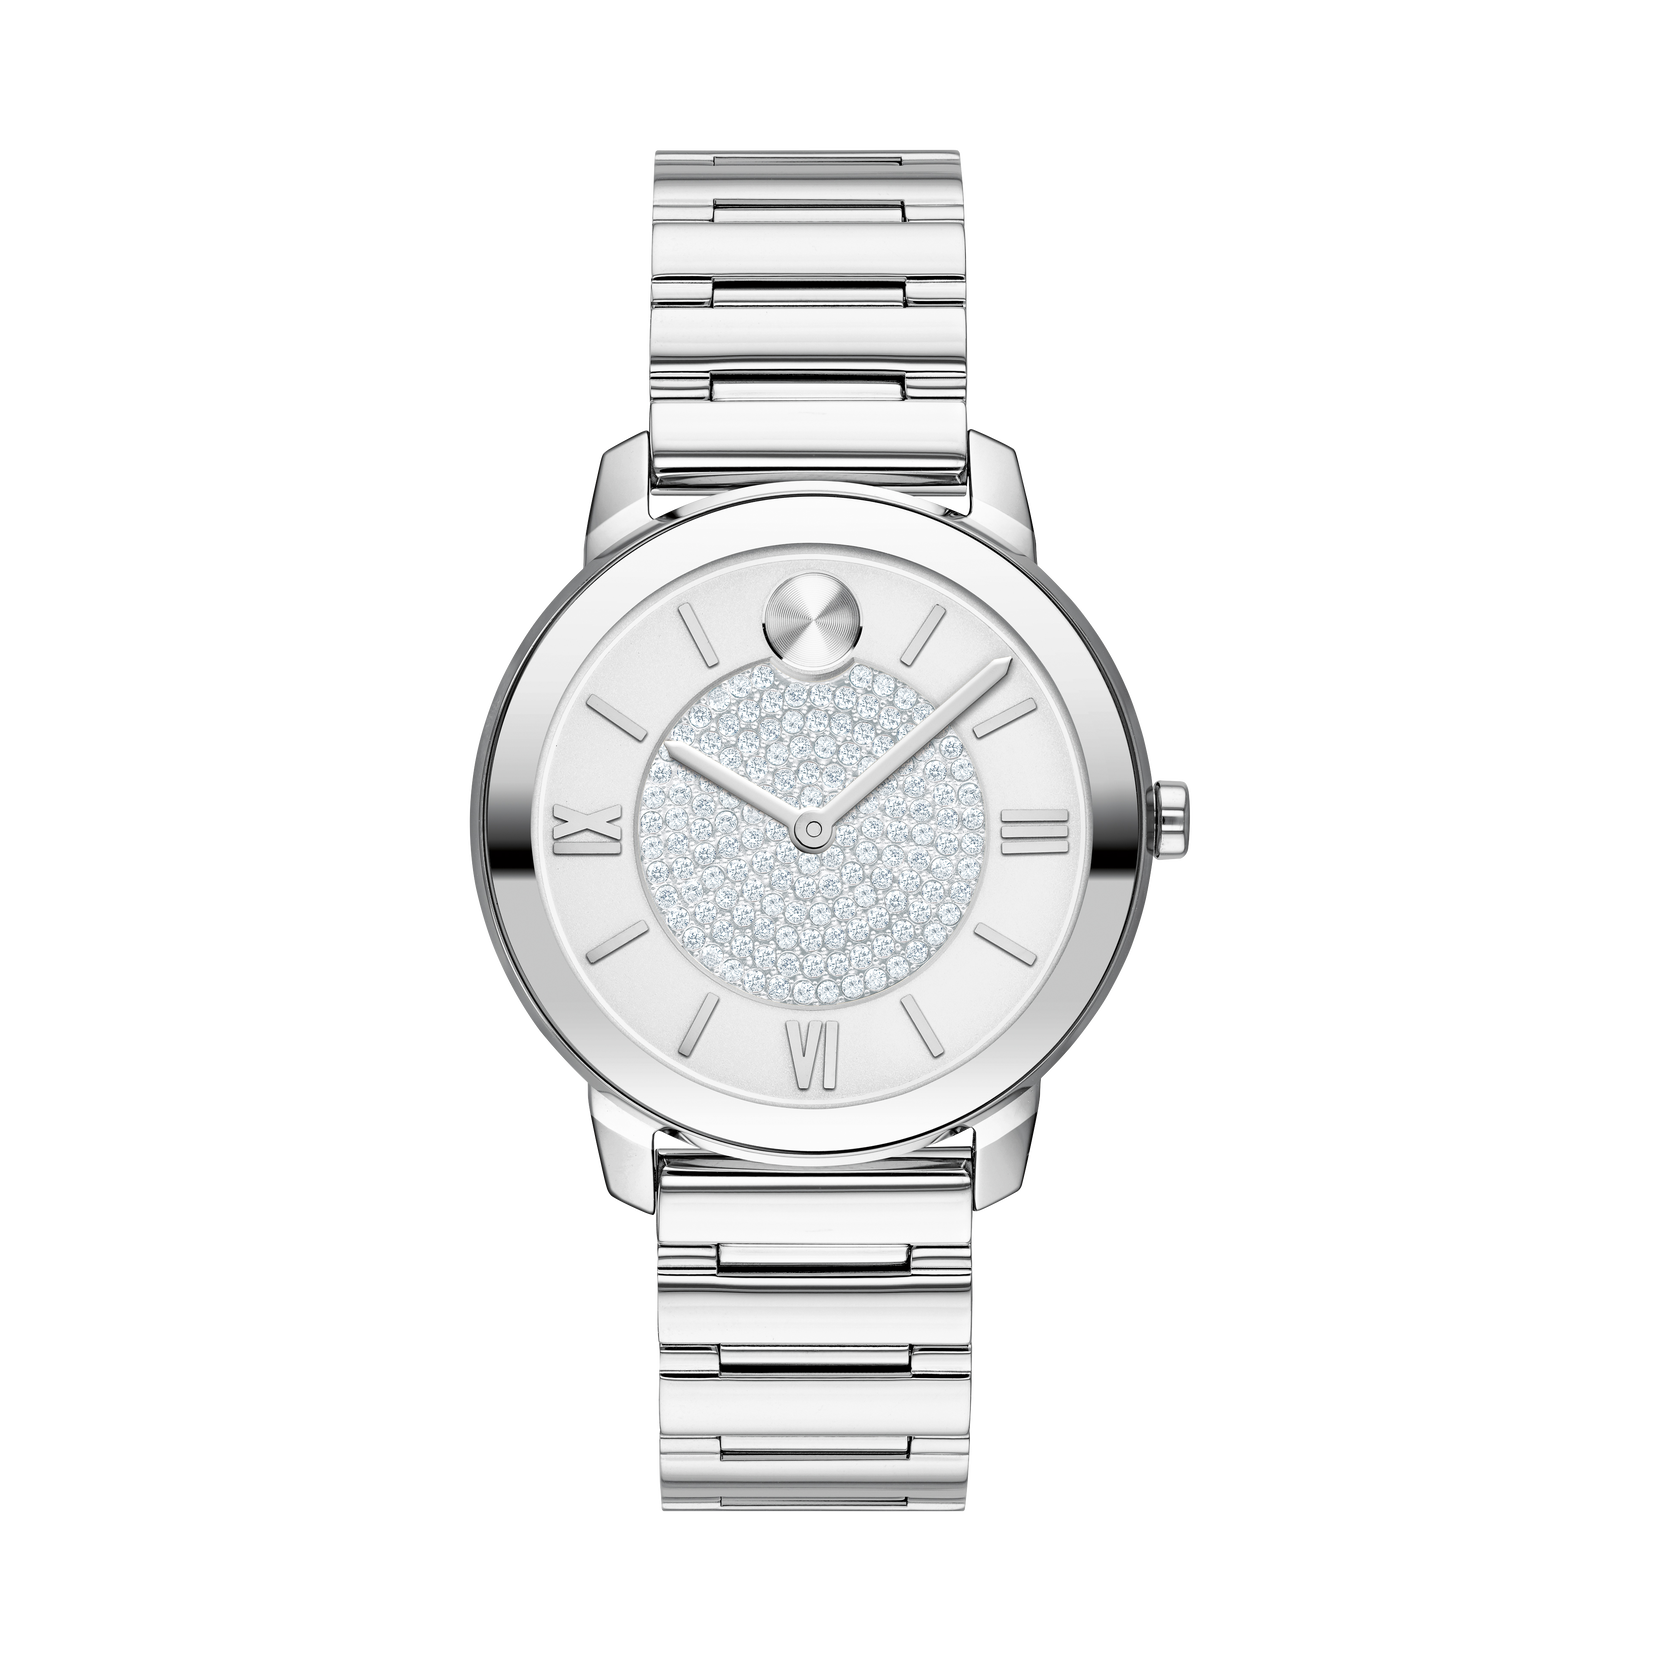 Trend Crystal Watch, 32mm